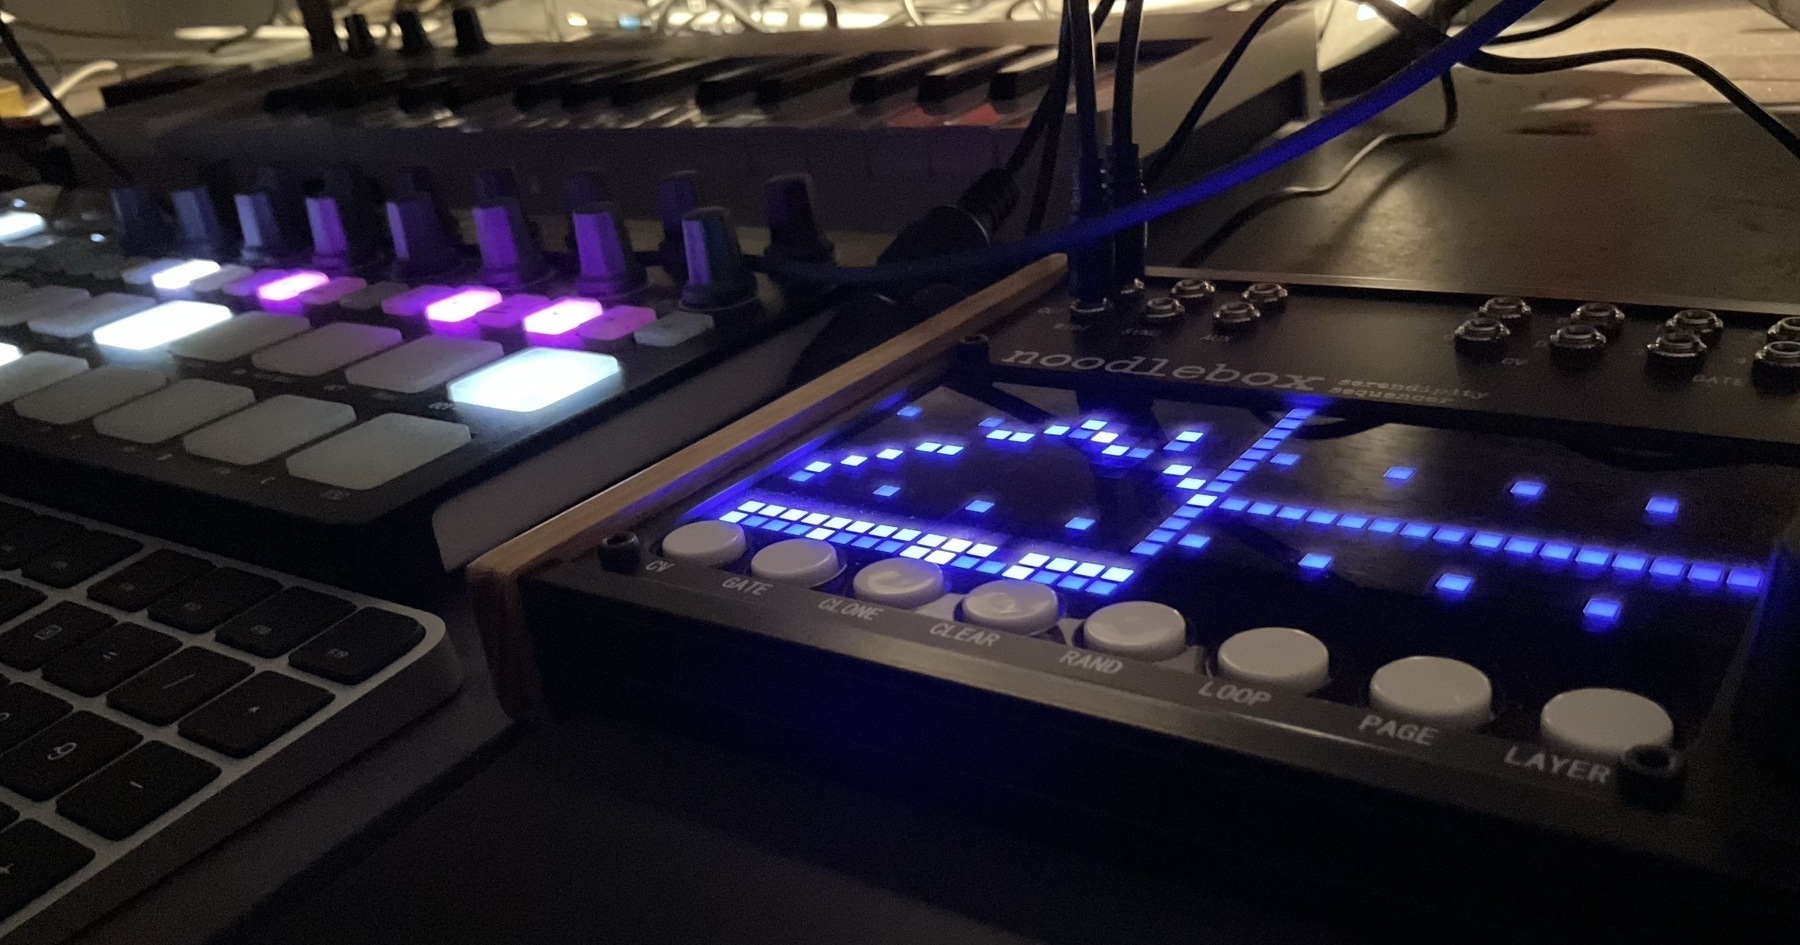 Light displays on sequencers representing notes which are turned into sound by a computer.